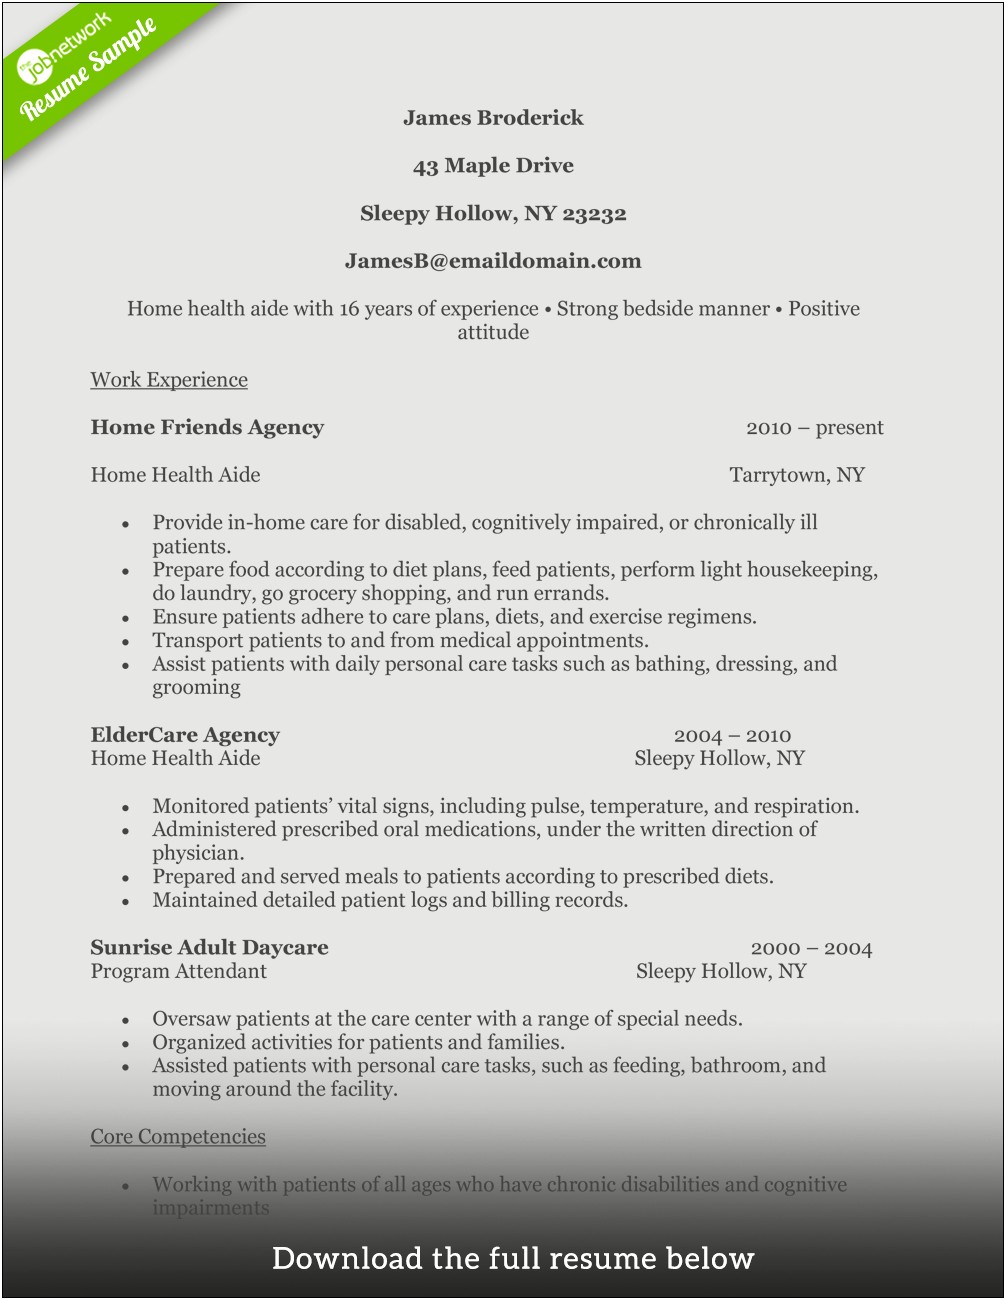 Resume Objective For School Aid